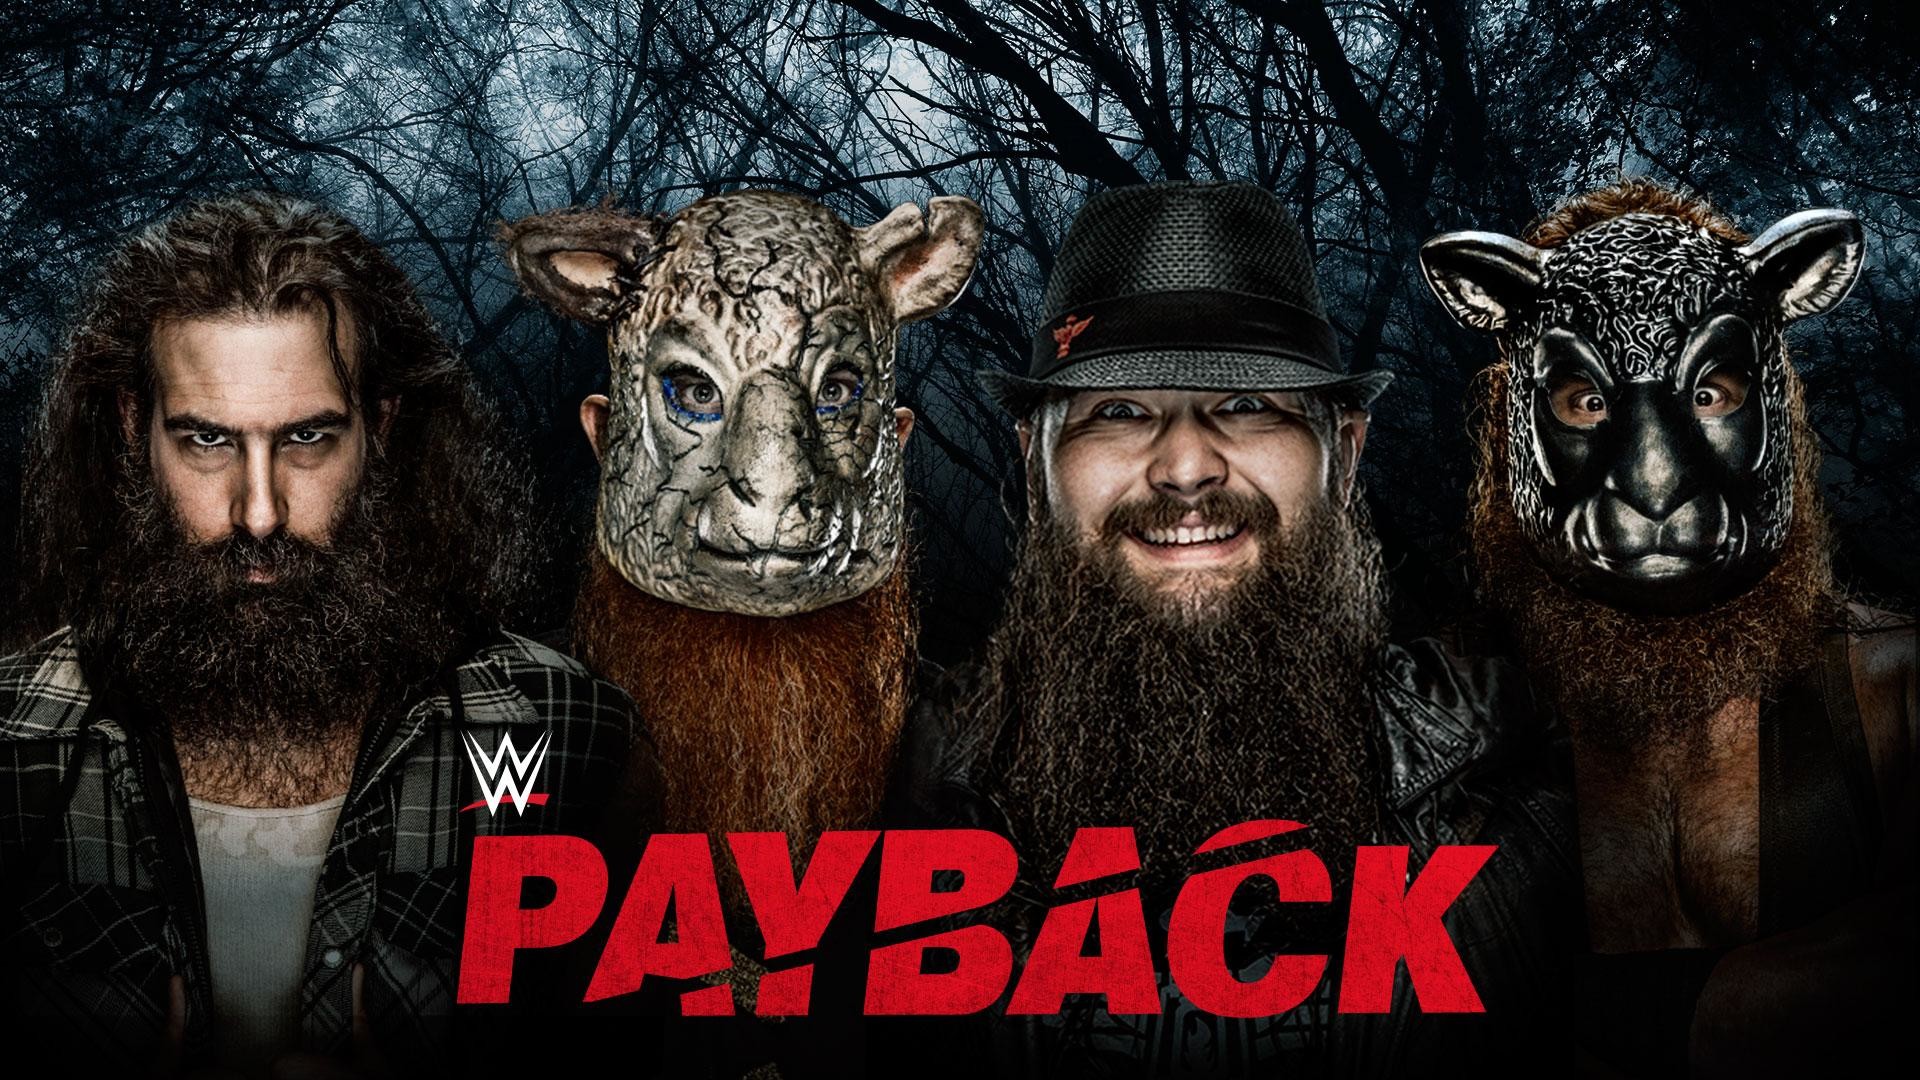 1920x1080 WWE Payback 2016 Results and Match Card